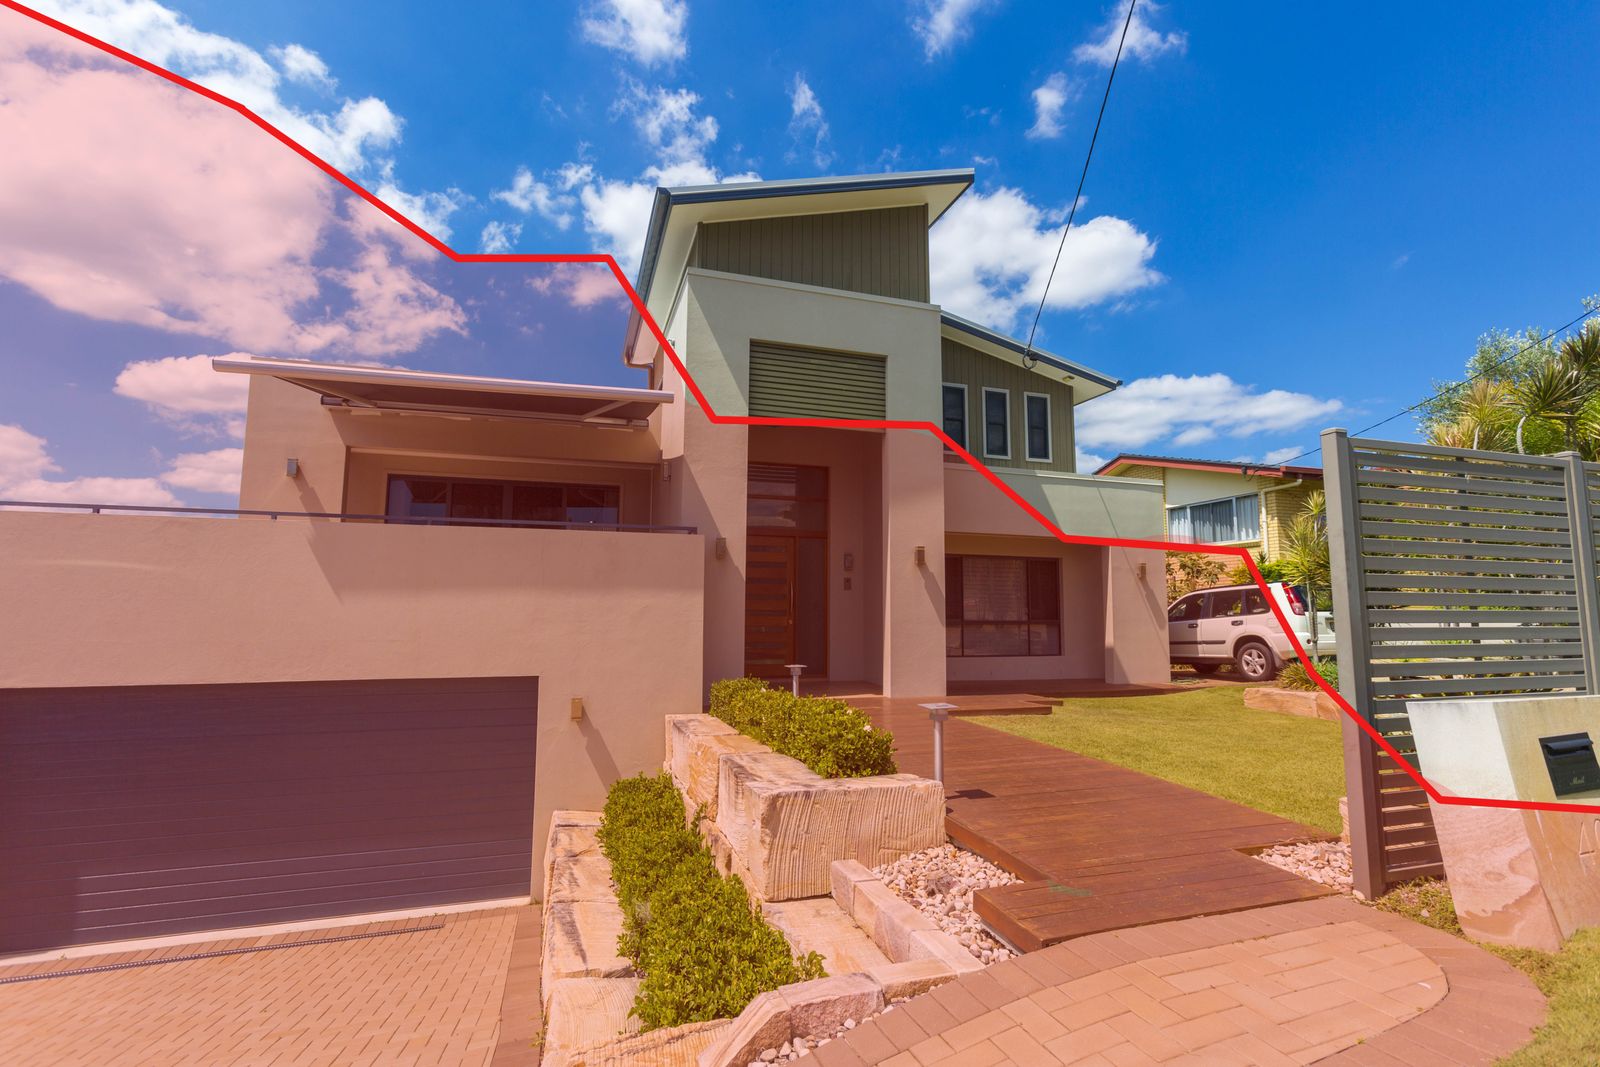 Coronavirus Australia: Property Prices Forecast to Dip Up to 10 Per Cent Before Rallying